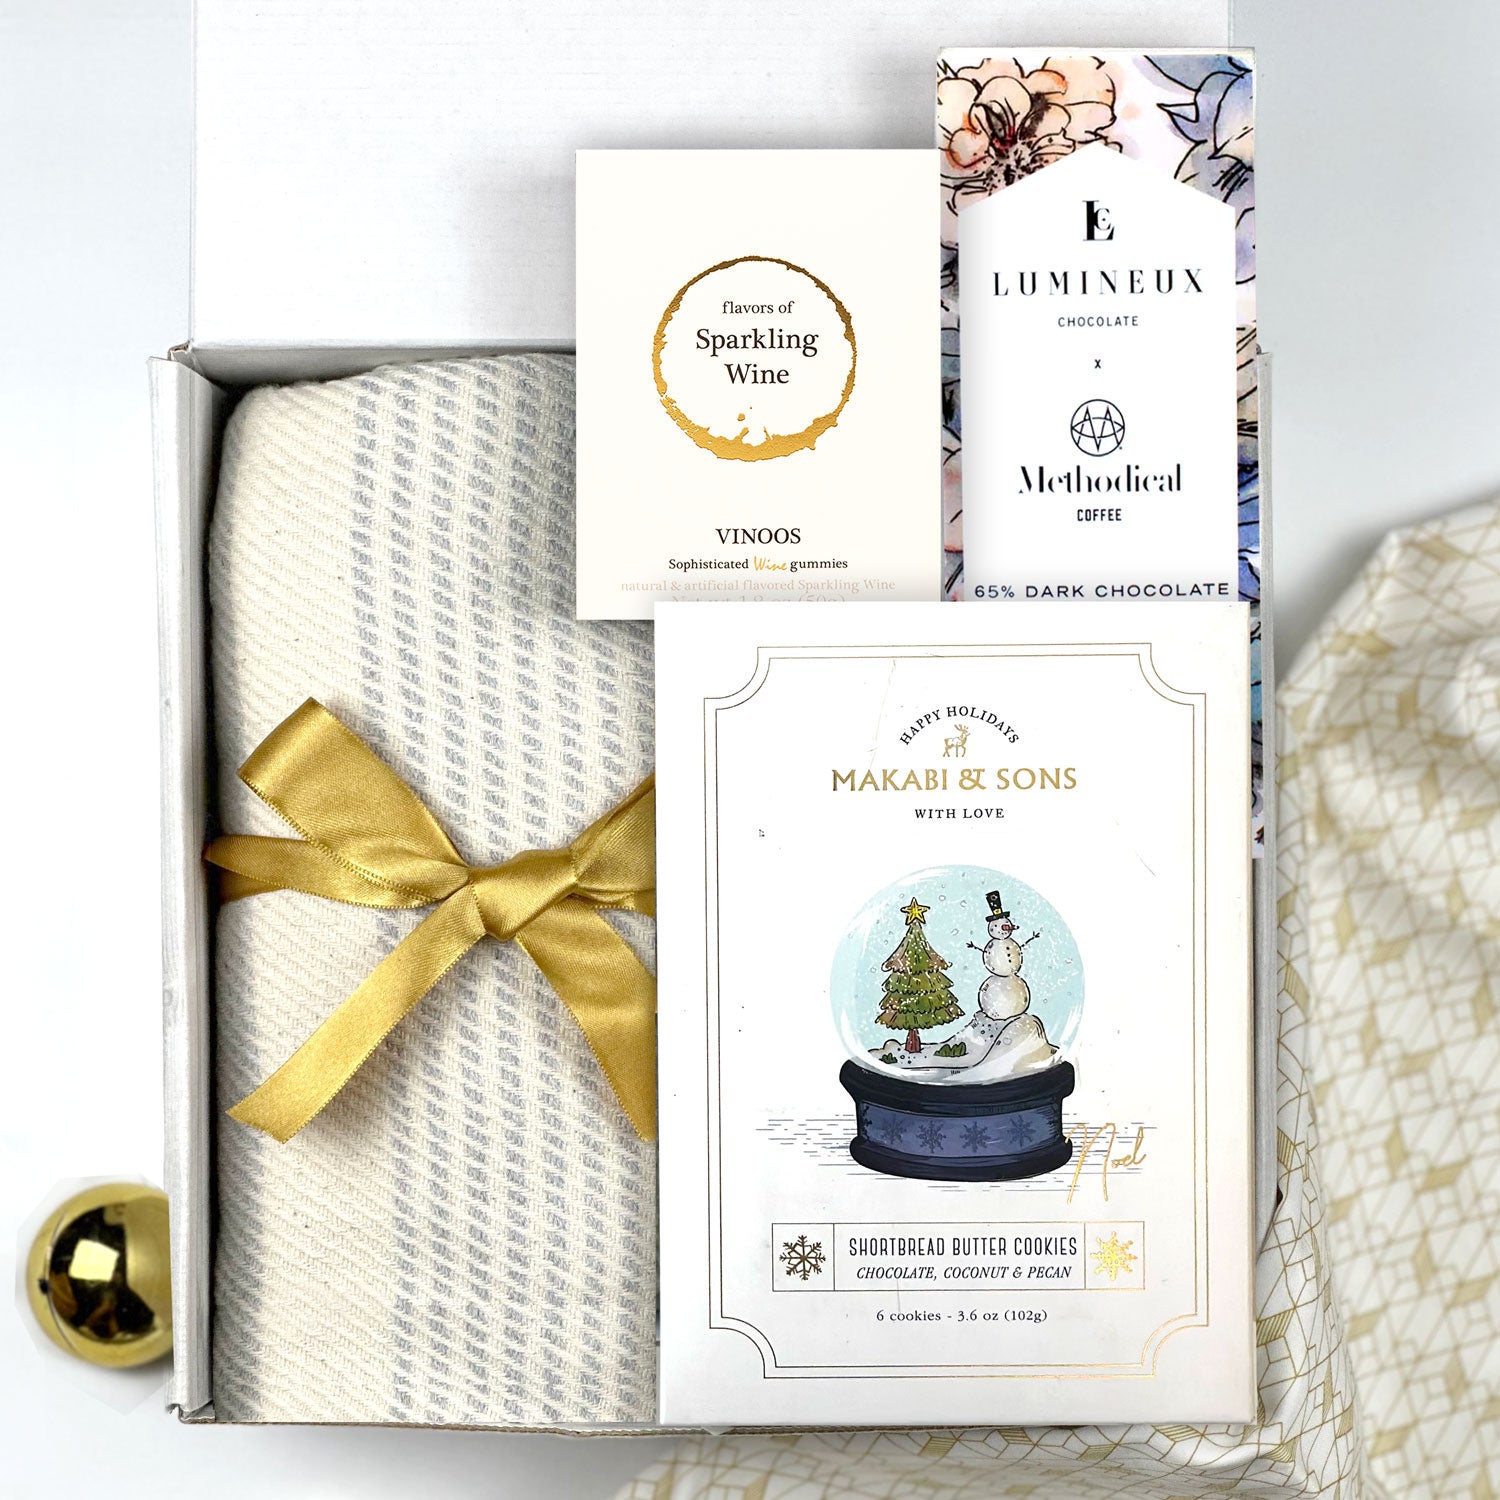 kadoo winter wonderland holiday curated gift box in furoshiki wraps. Gift items: chocolate, blanket, cookie, wine gummies and more.